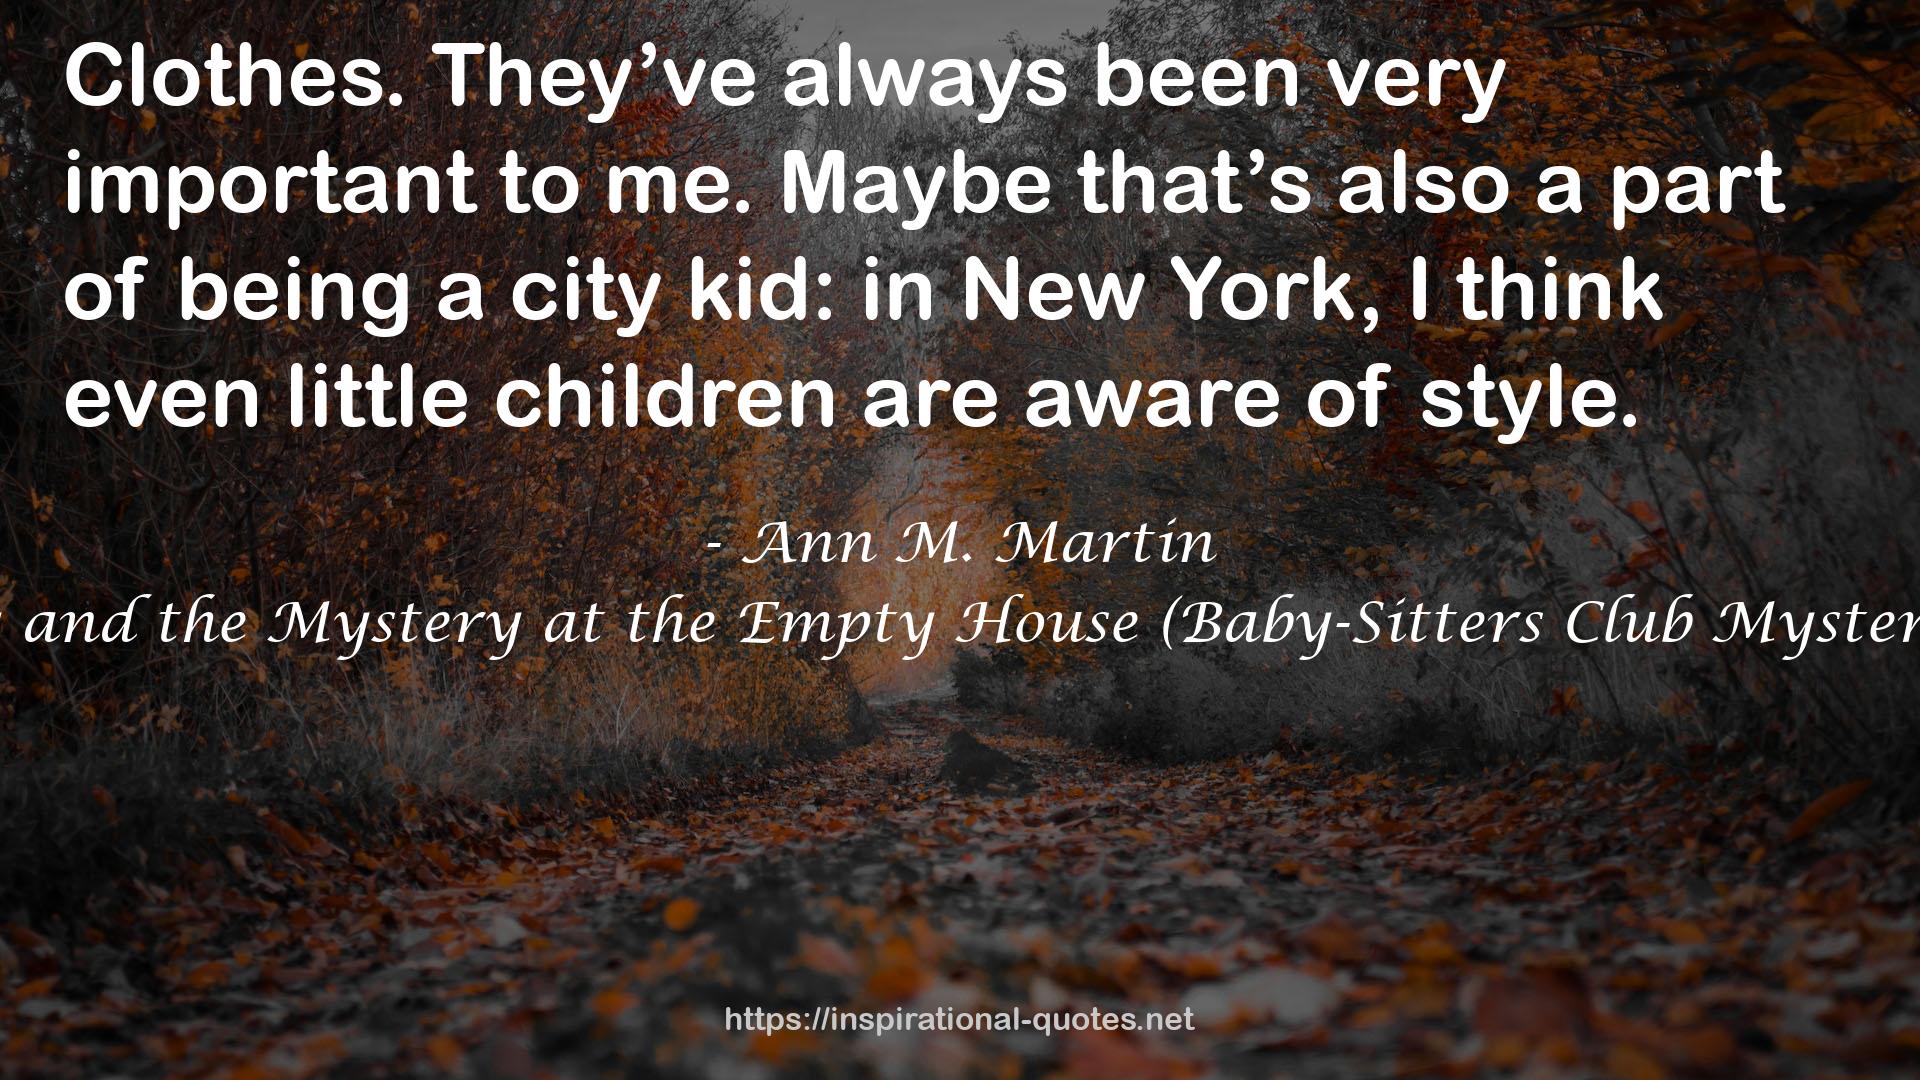 Stacey and the Mystery at the Empty House (Baby-Sitters Club Mystery, #18) QUOTES